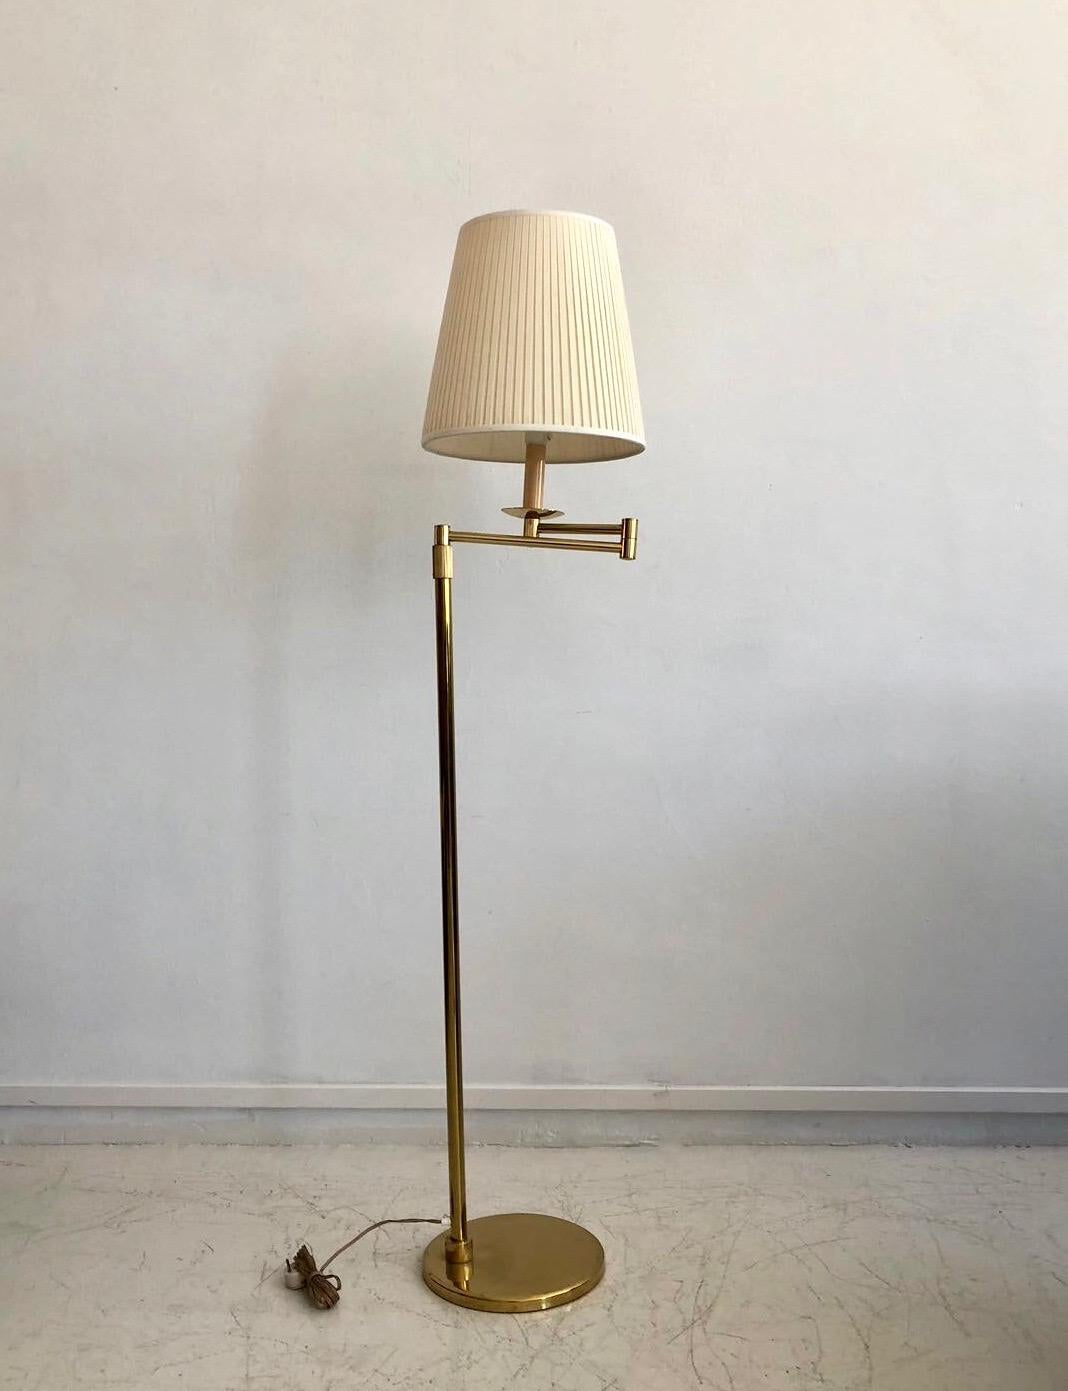 Brass floor lamp in the style of Hans-Agne Jakobsson with adjustable arm and cream-colored shade from circa 1980s. European plug. Great reading lamp due to its adjustable arm, which goes out up to 50 cm.